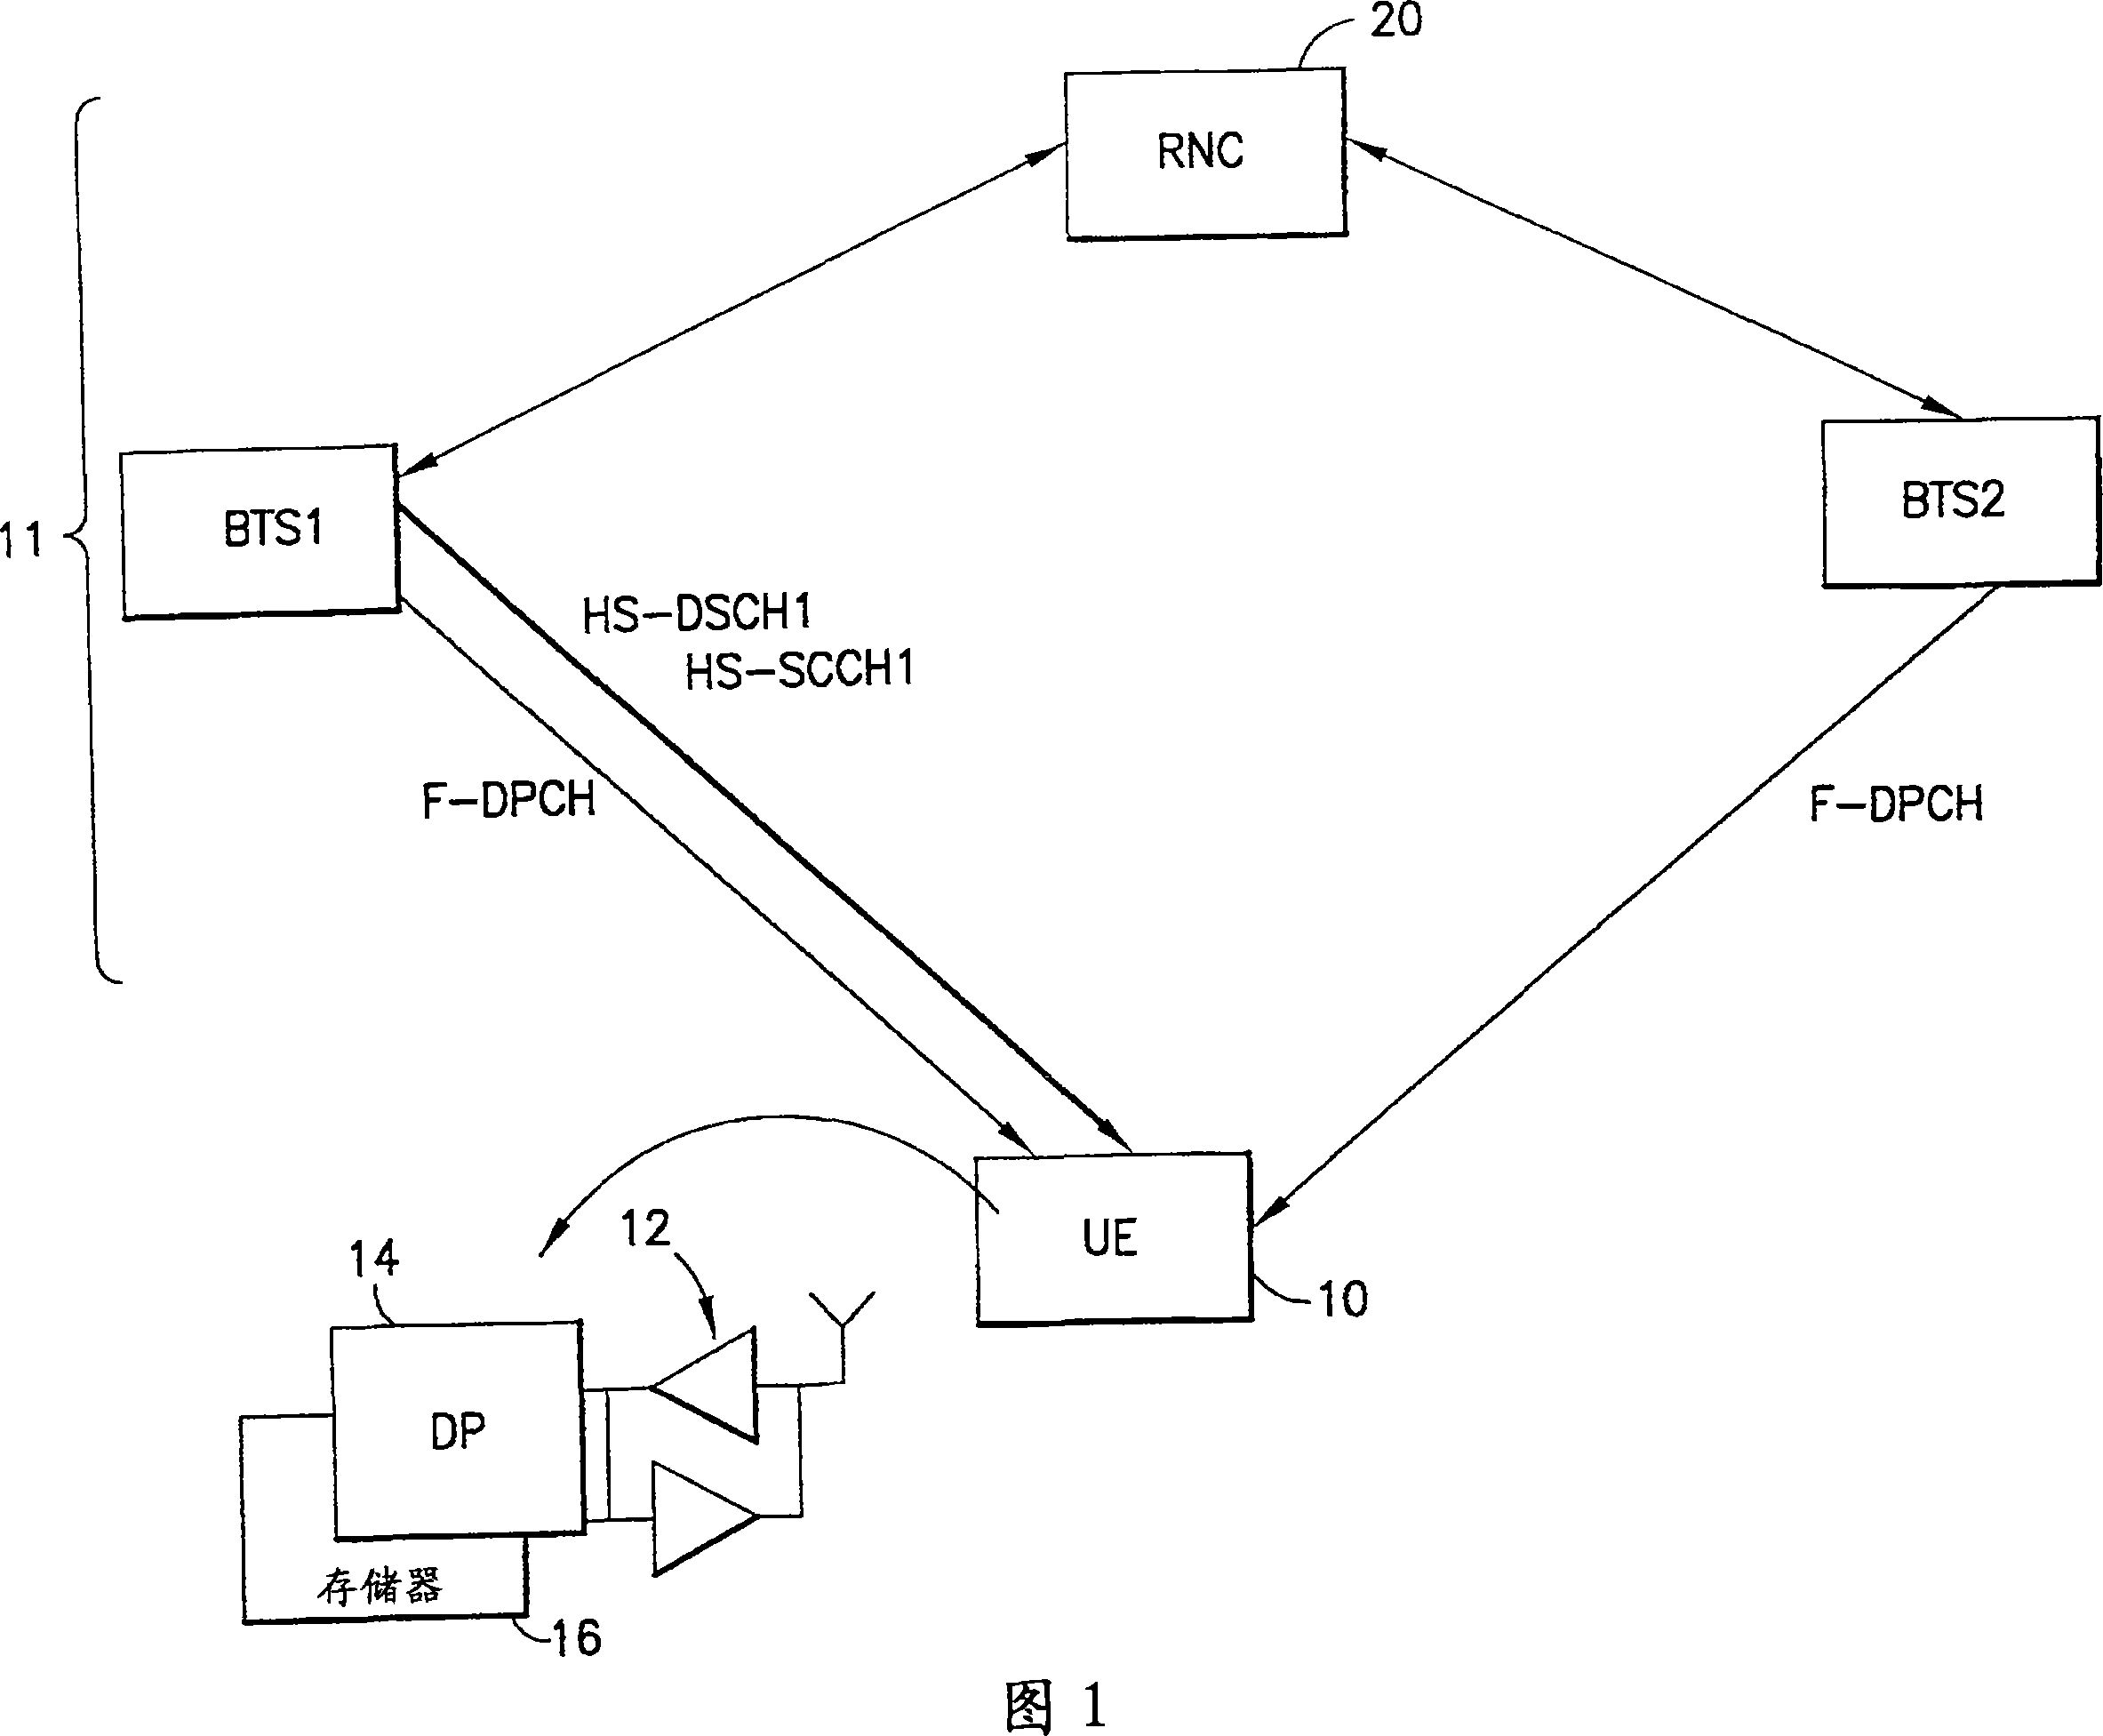 Apparatus, method and computer program providing enhanced fractional dedicated physical channel downlink power control during soft handover